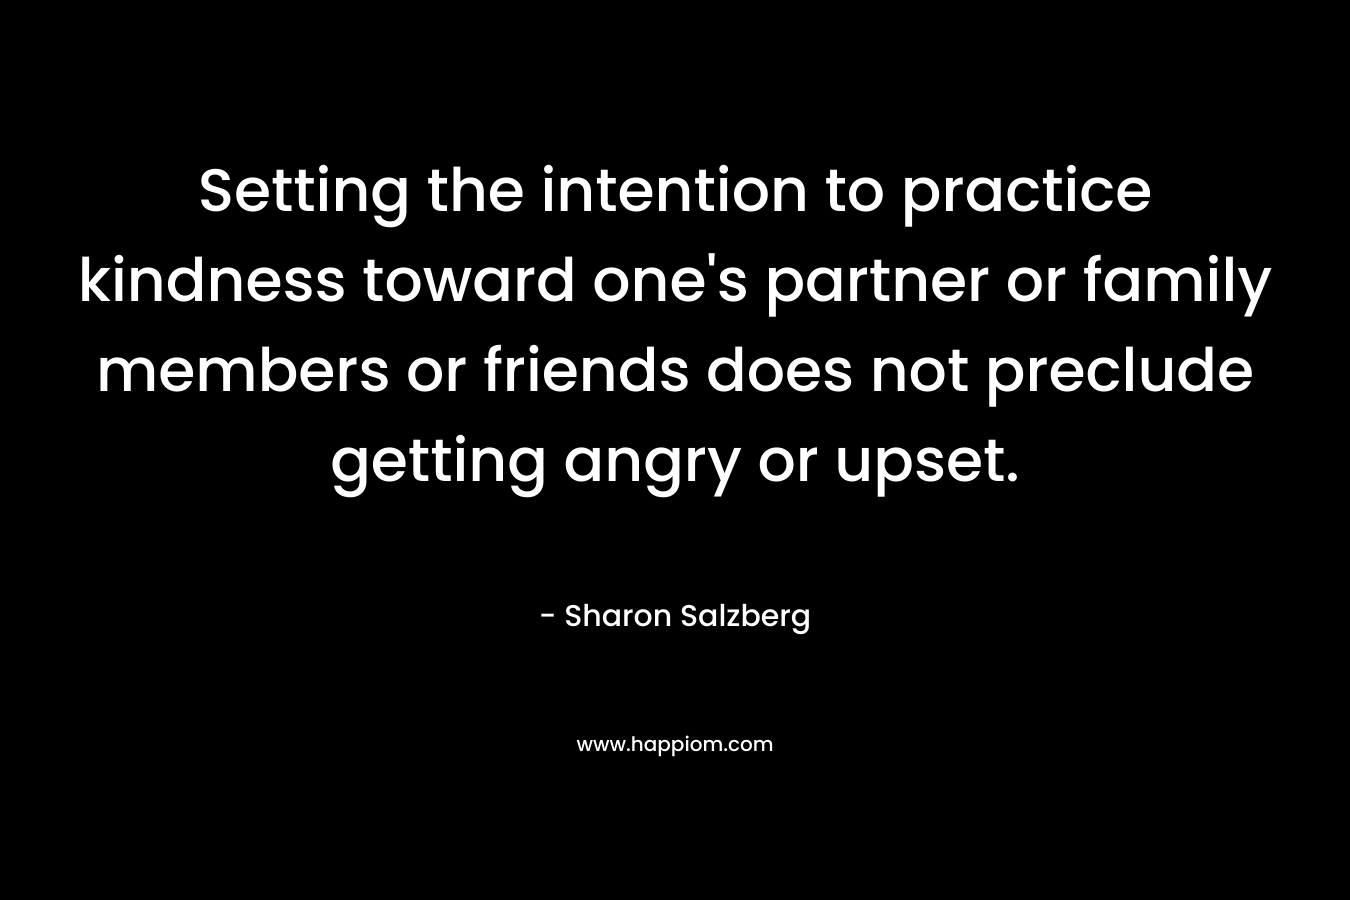 Setting the intention to practice kindness toward one's partner or family members or friends does not preclude getting angry or upset.